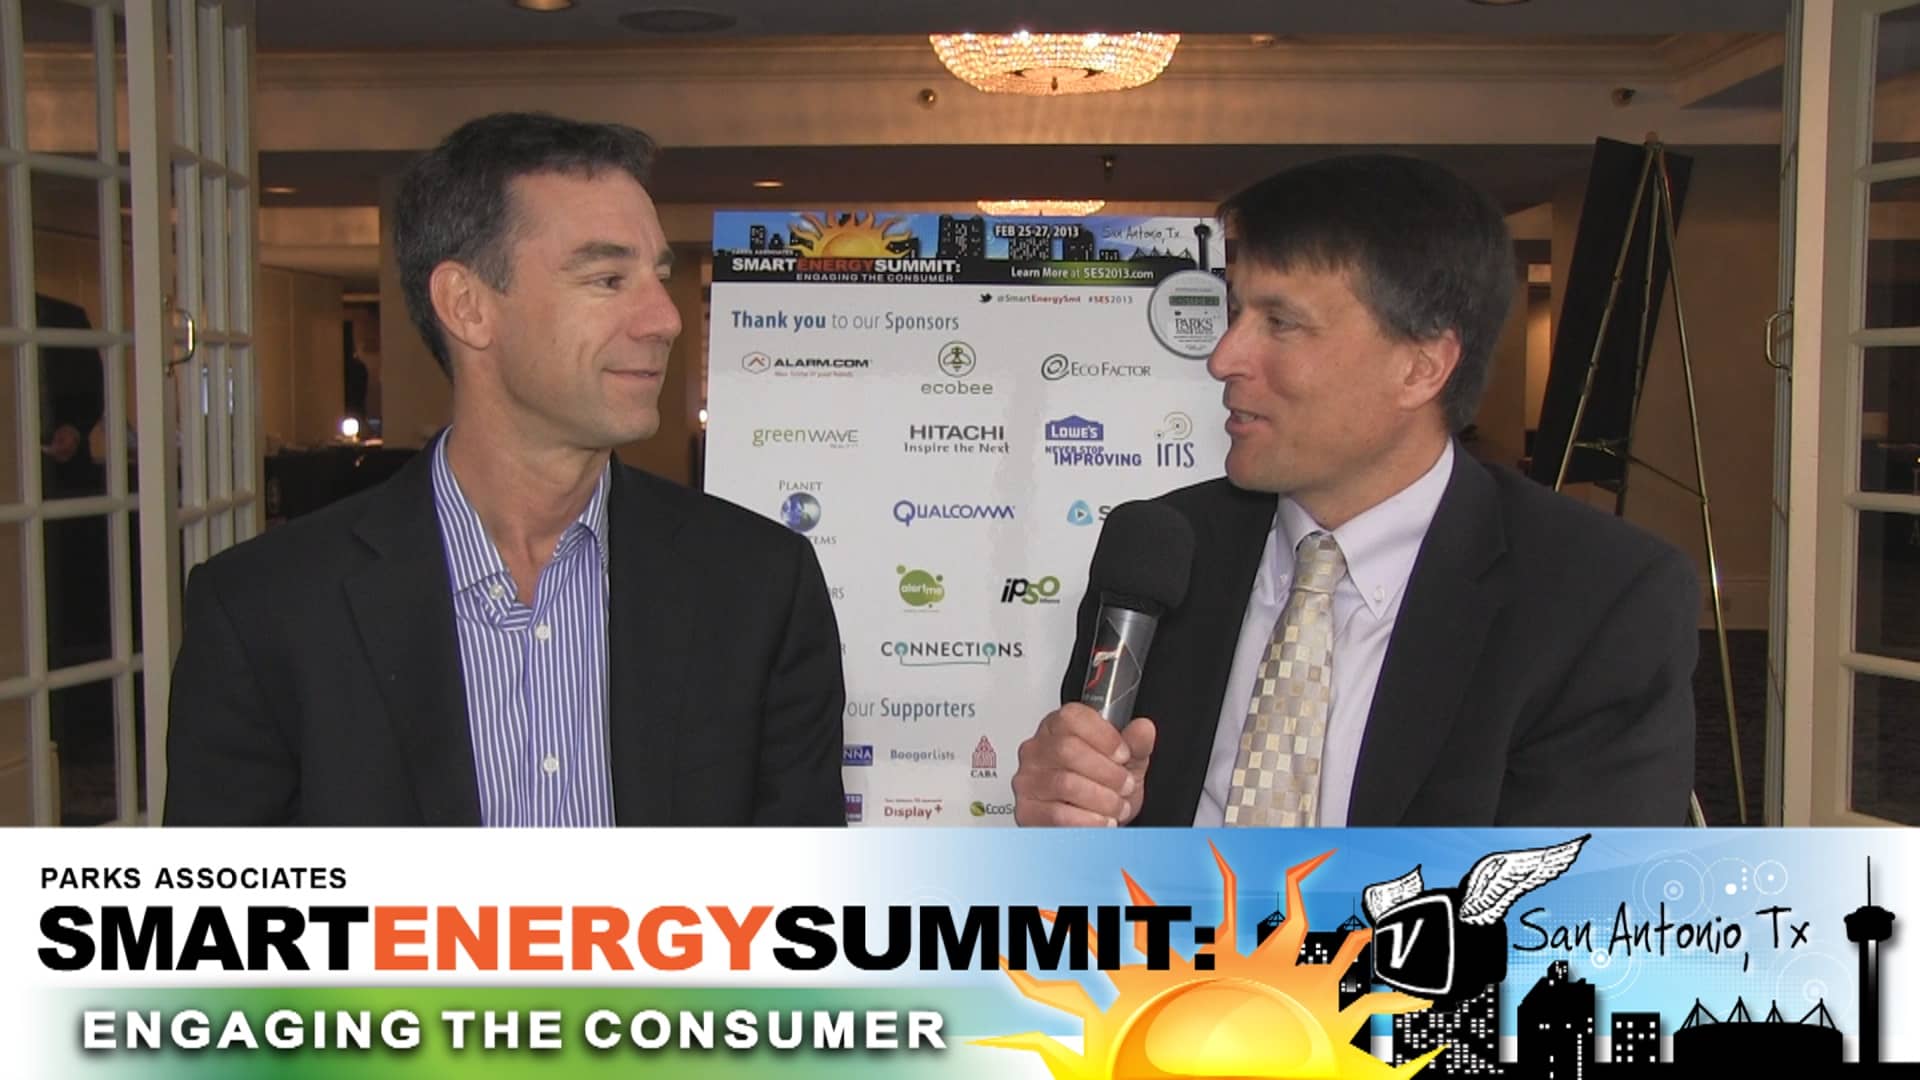 David Bercovich of AlertMe talks about his company's role in Smart Energy.